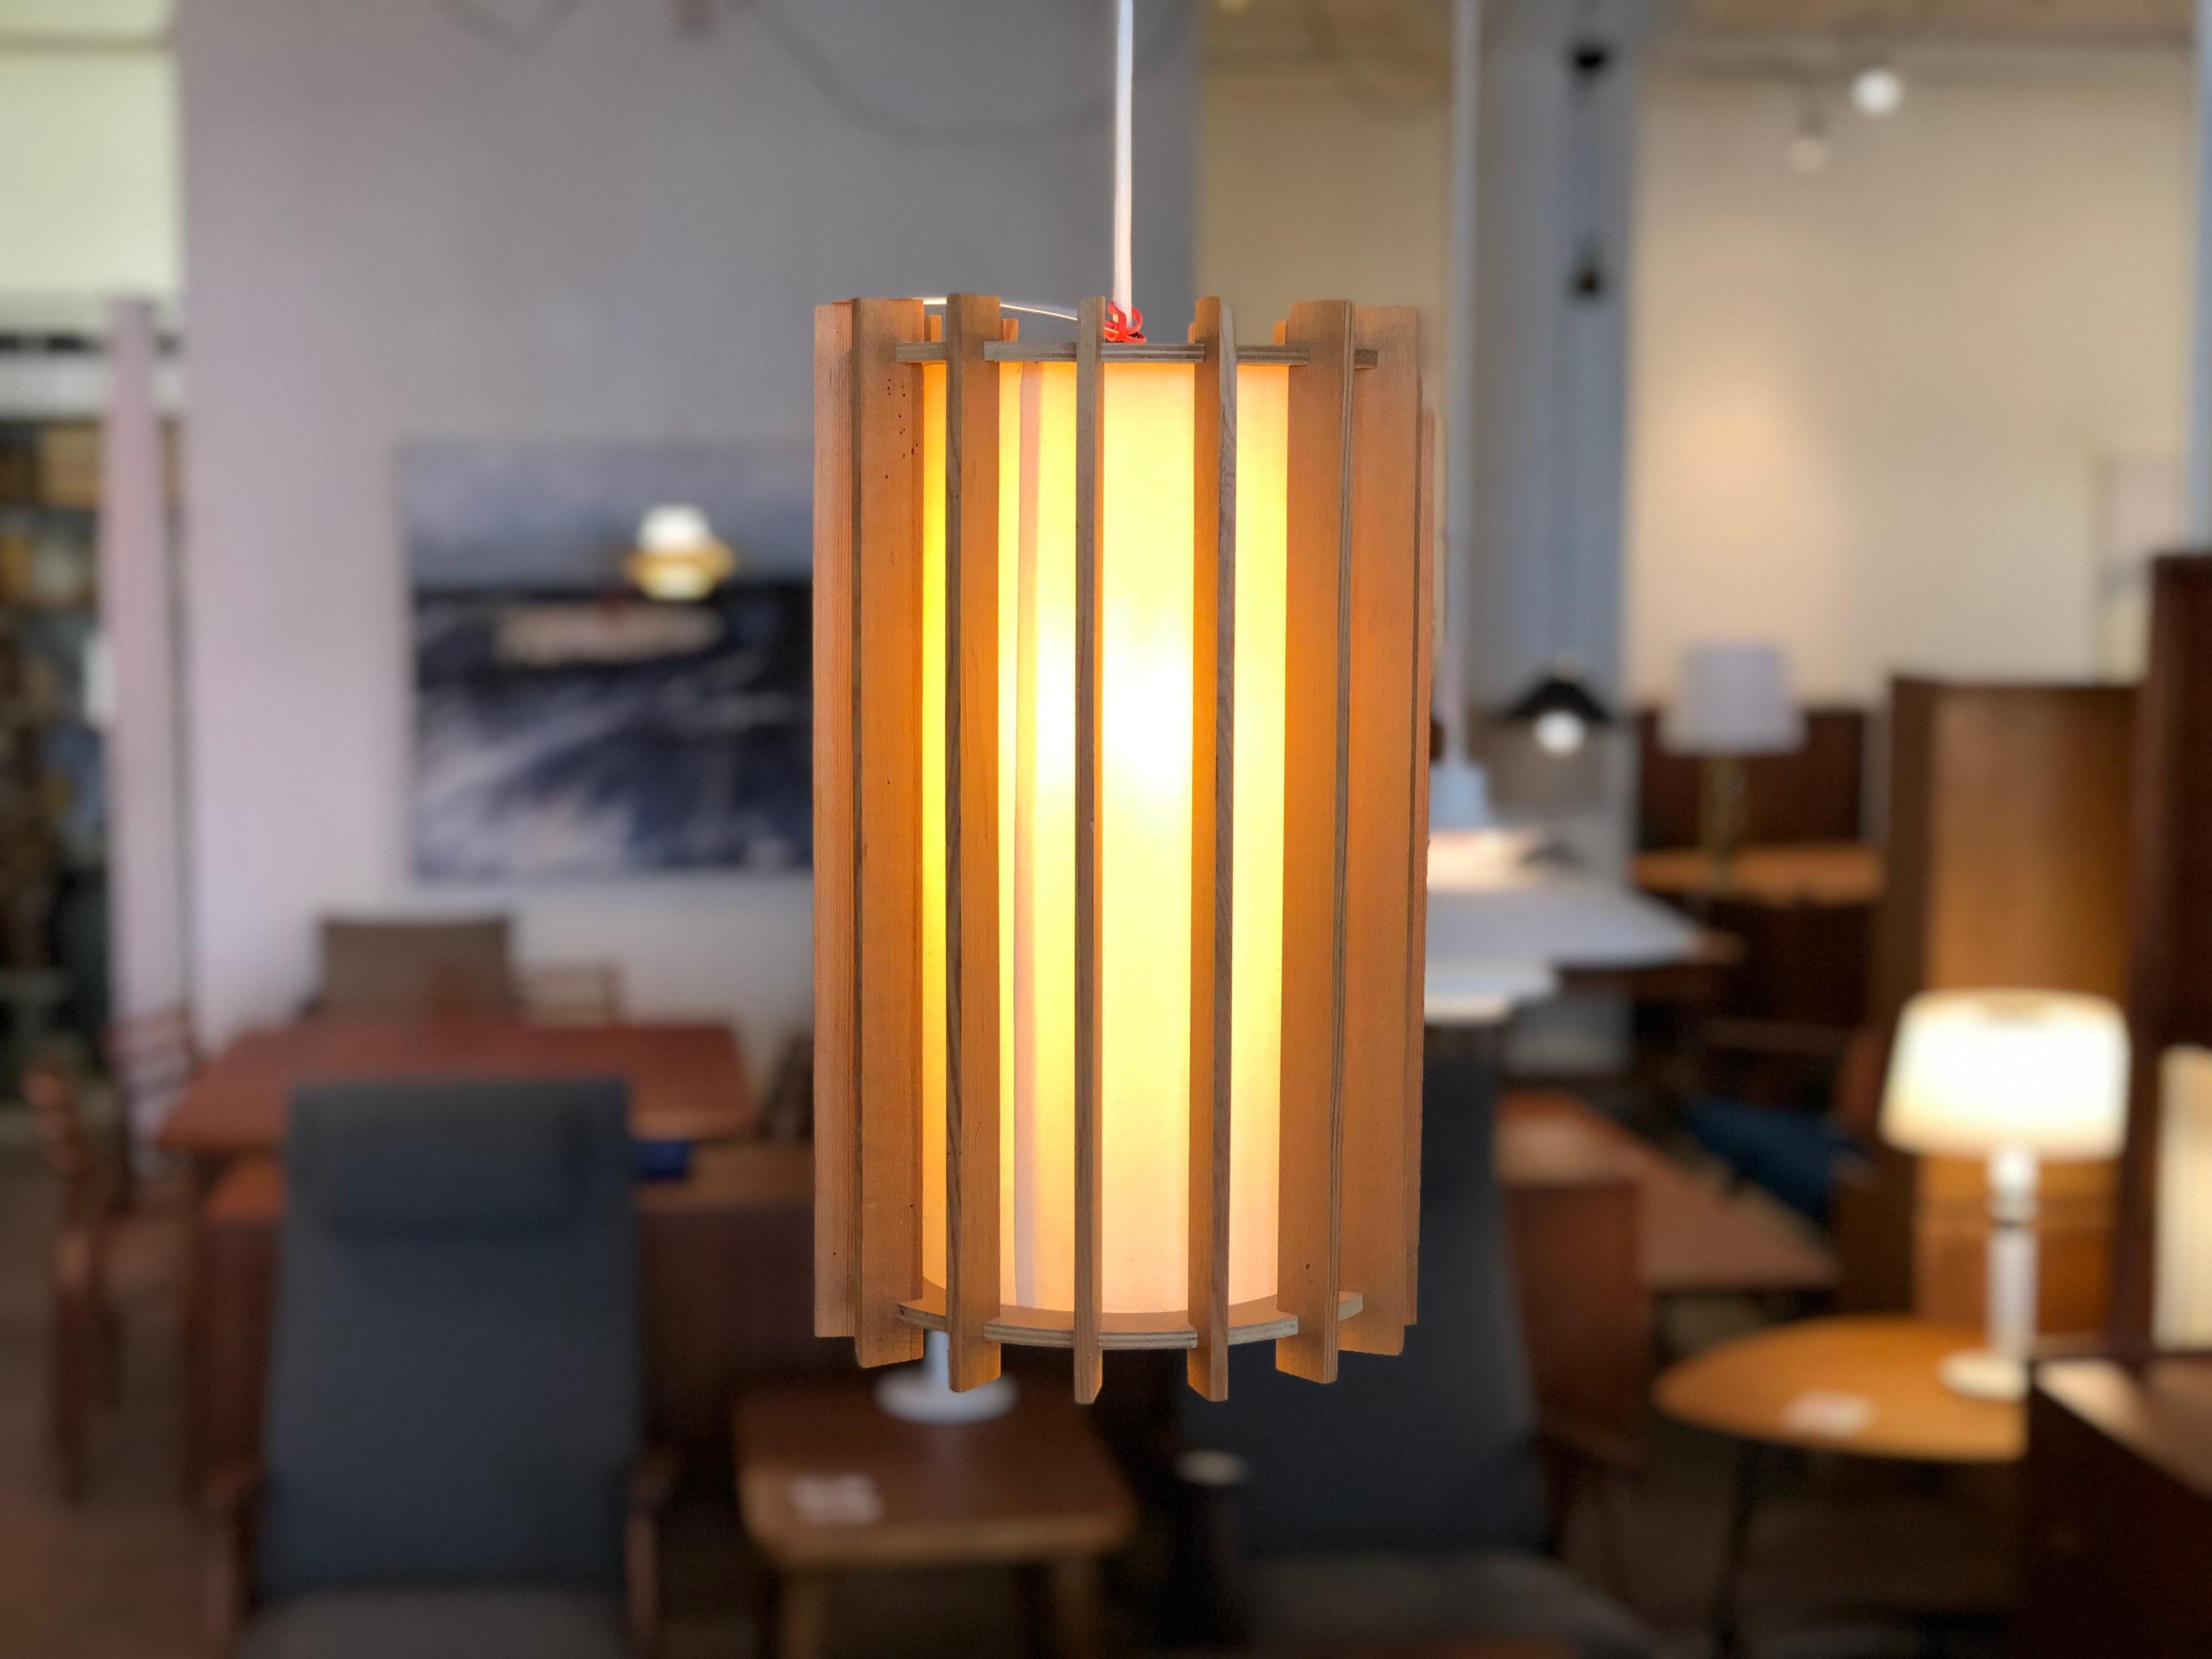 This conical piece boasts a fir slat exoskeleton and a linen shade lining inside. When light is on the fixture has a soft diffuse glow, a great accent for any modernist contemporary setting.

Professional, skilled furniture restoration is an